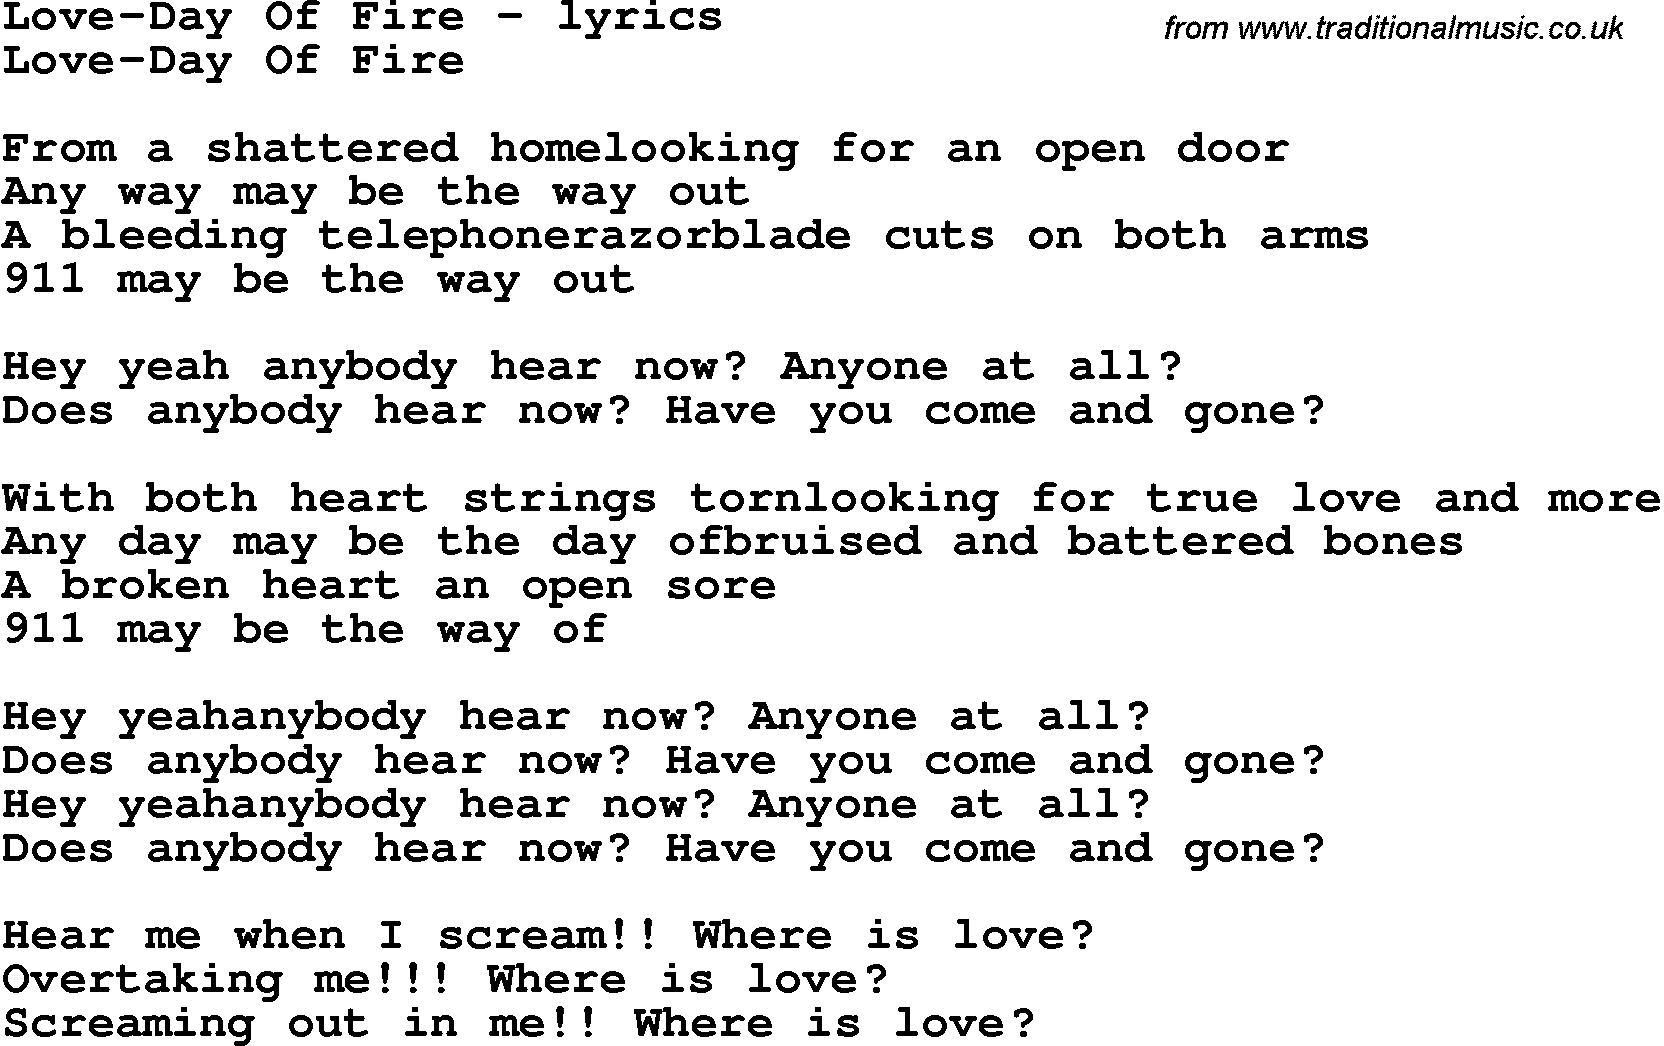 Love Song Lyrics for: Love-Day Of Fire